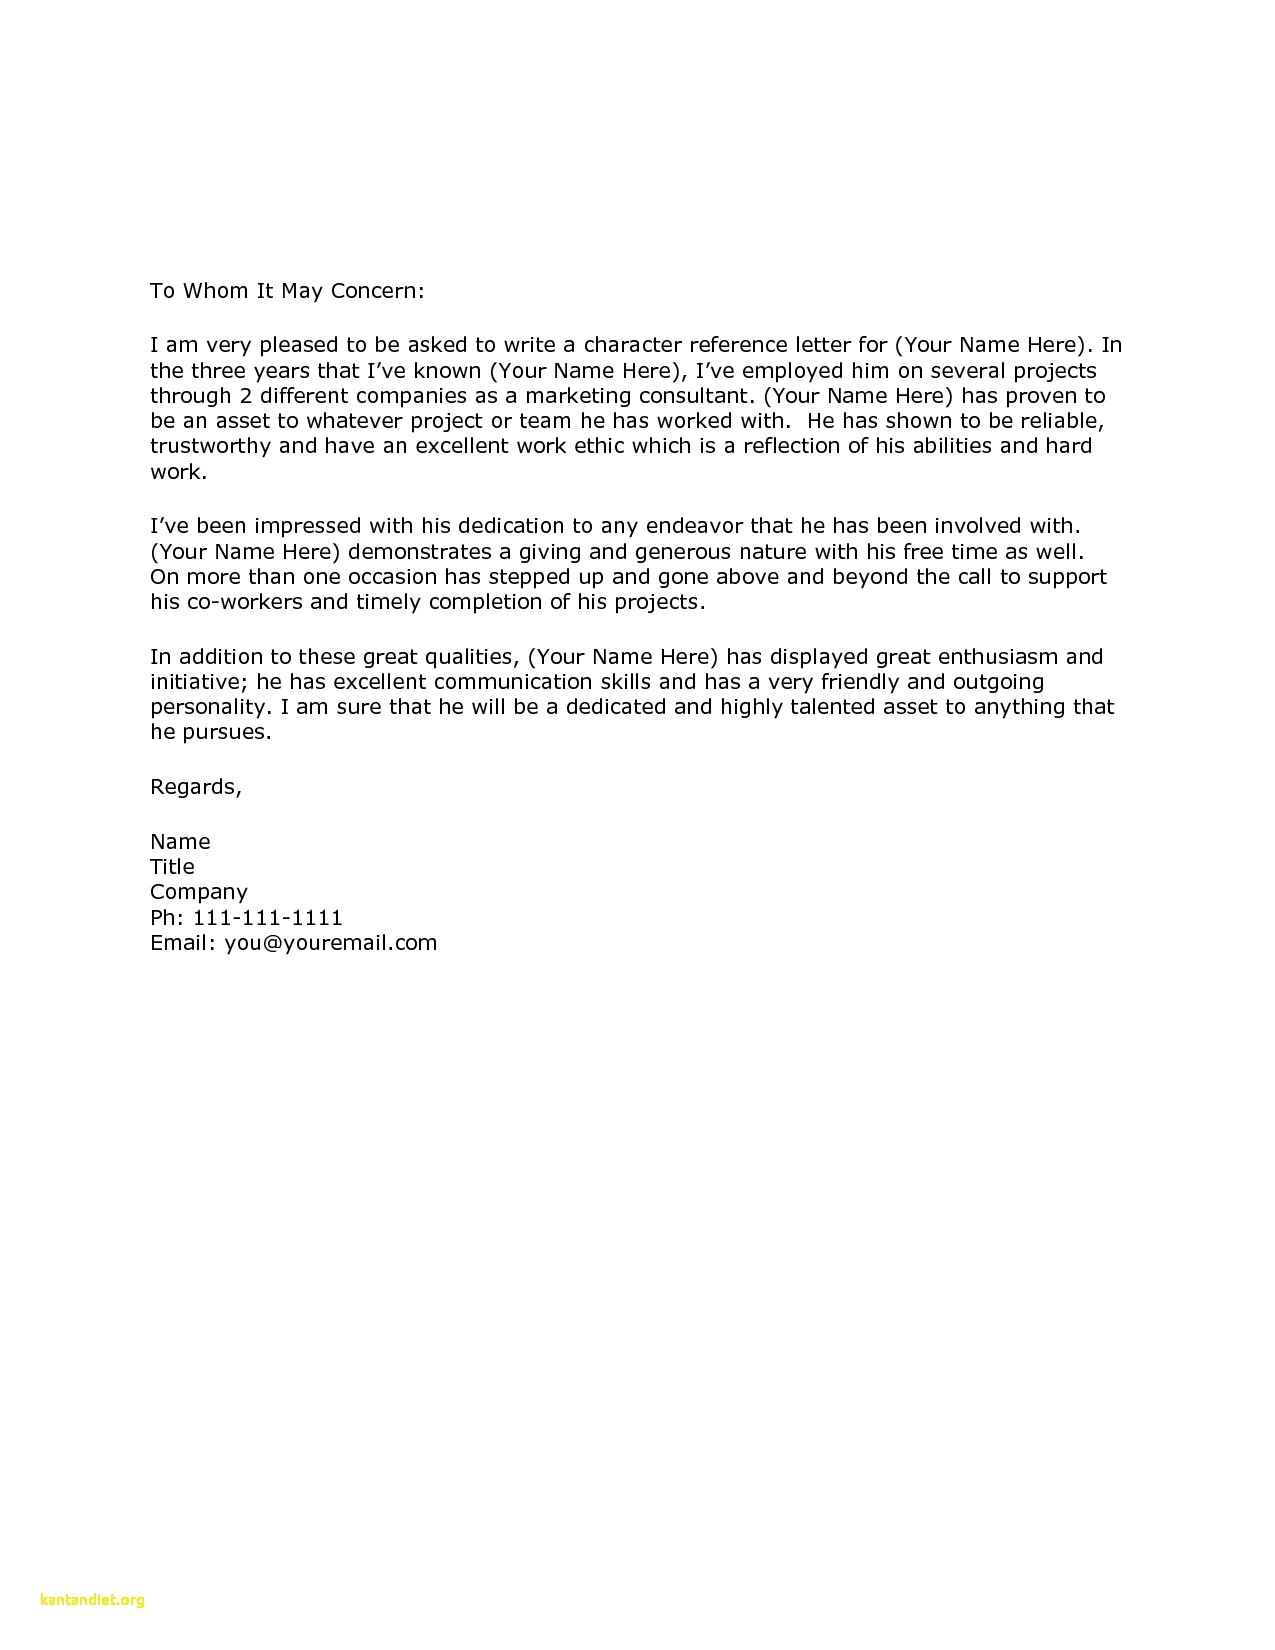 Ccw Recommendation Letter Enom with regard to dimensions 1275 X 1650